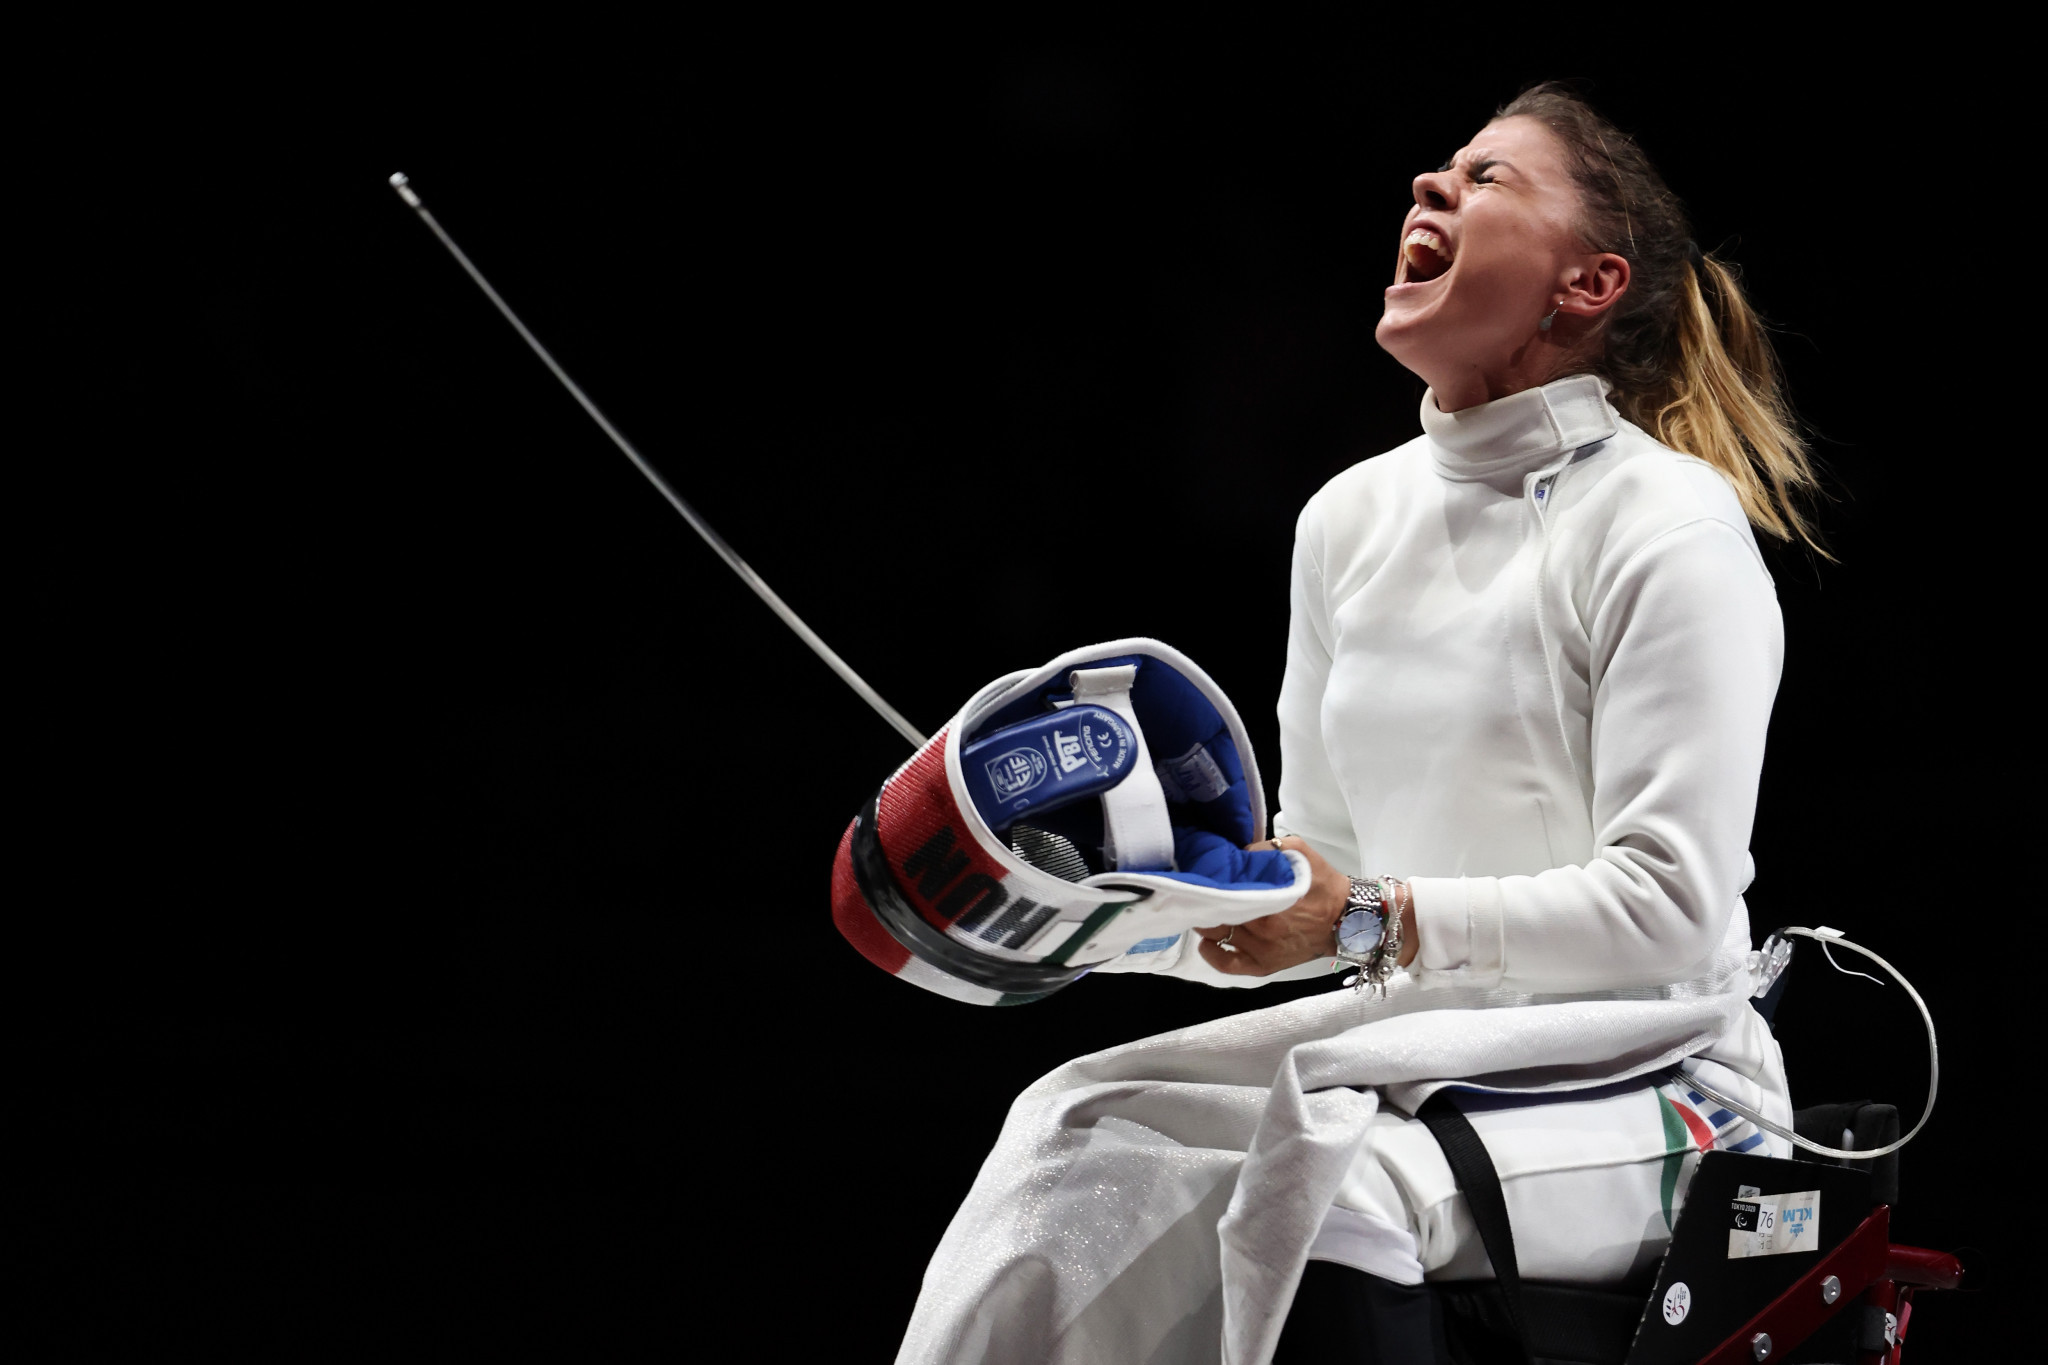 Wheelchair fencer Amarilla Veres won Hungary's first gold medal of the Games ©Getty Images